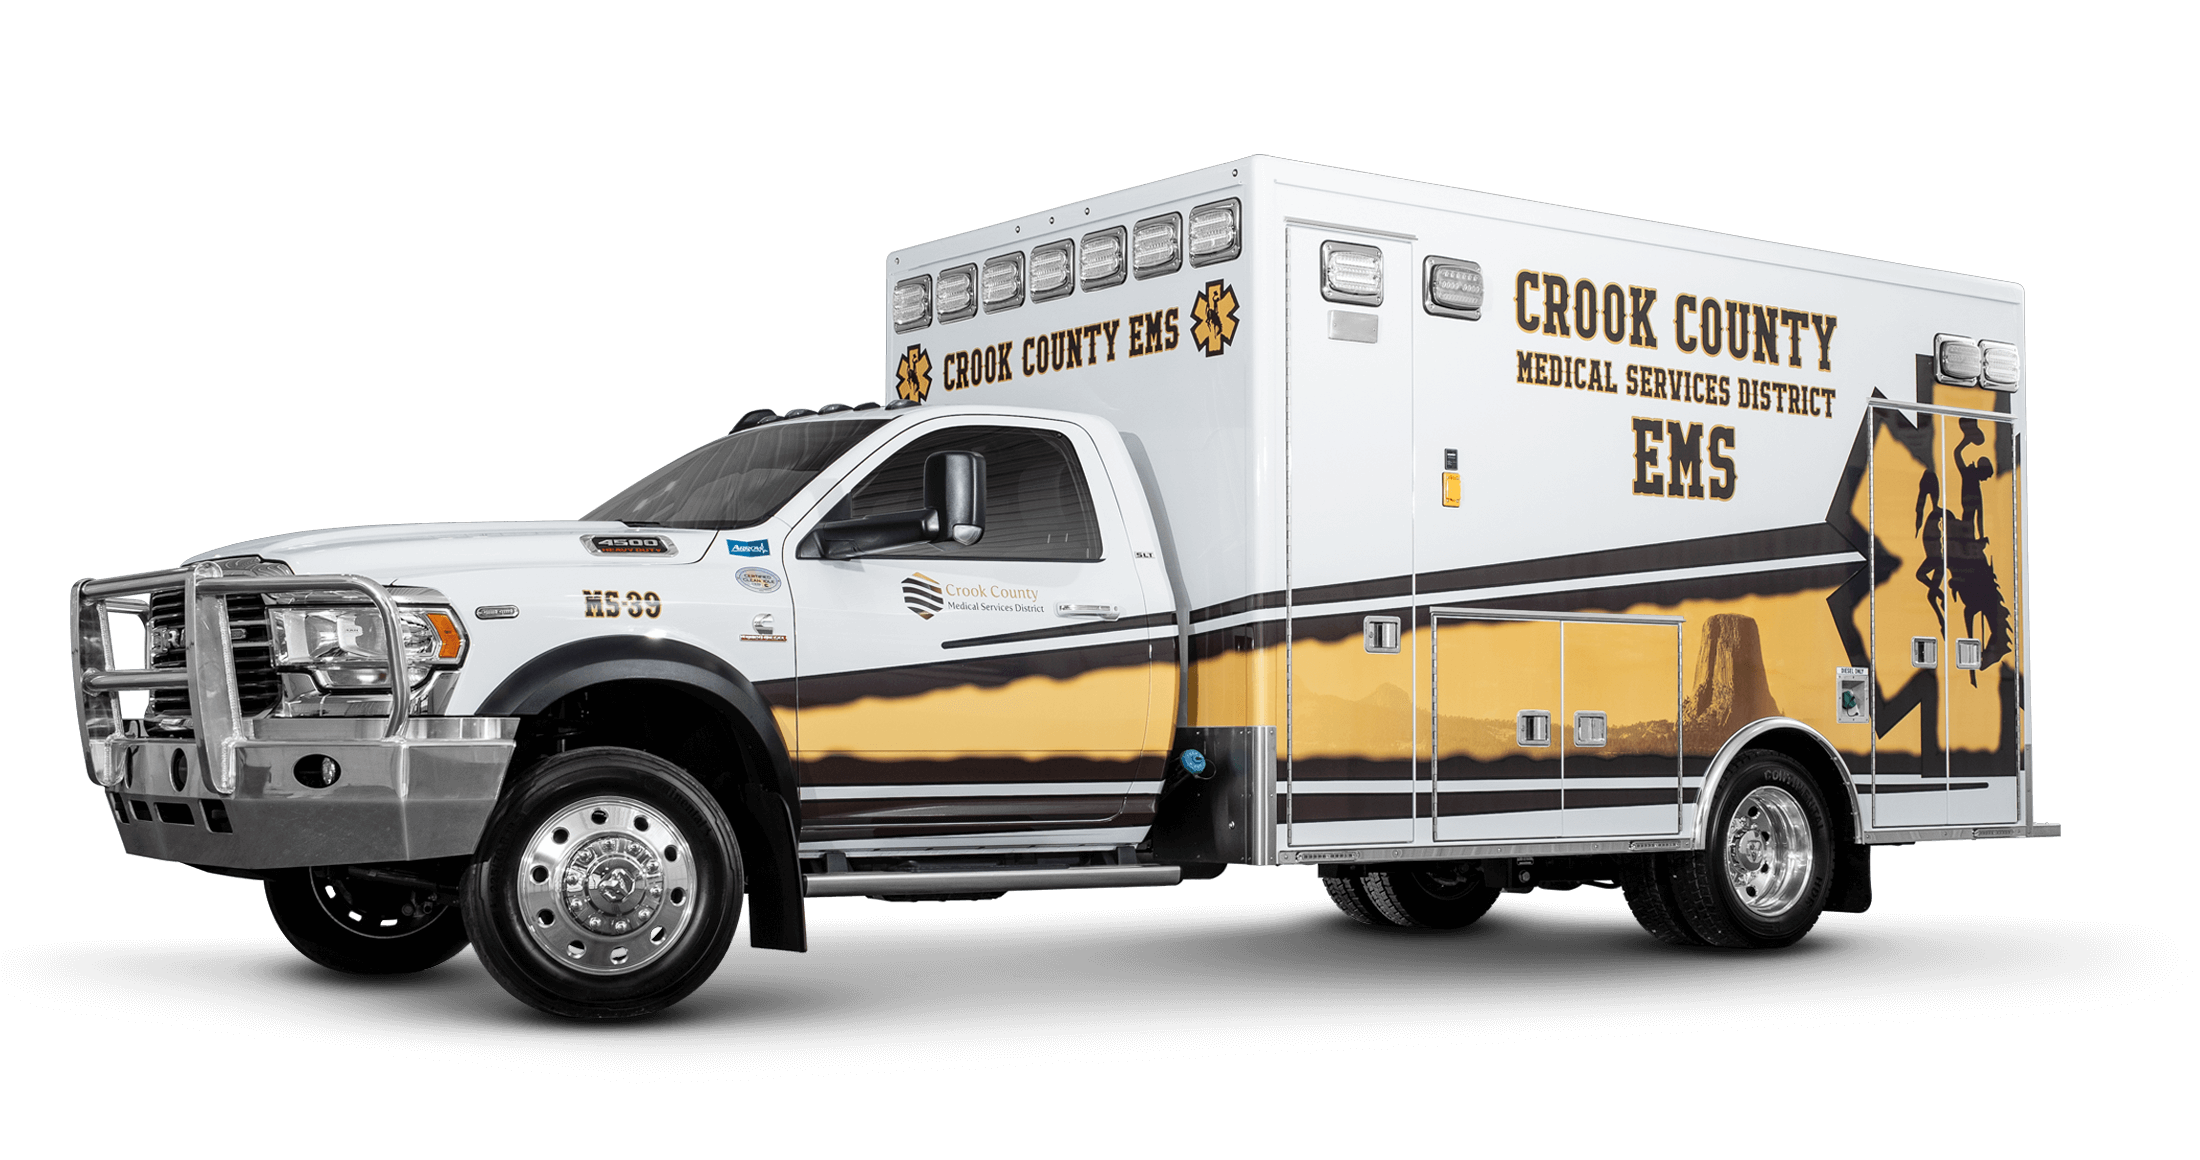 Crook County Medical Services